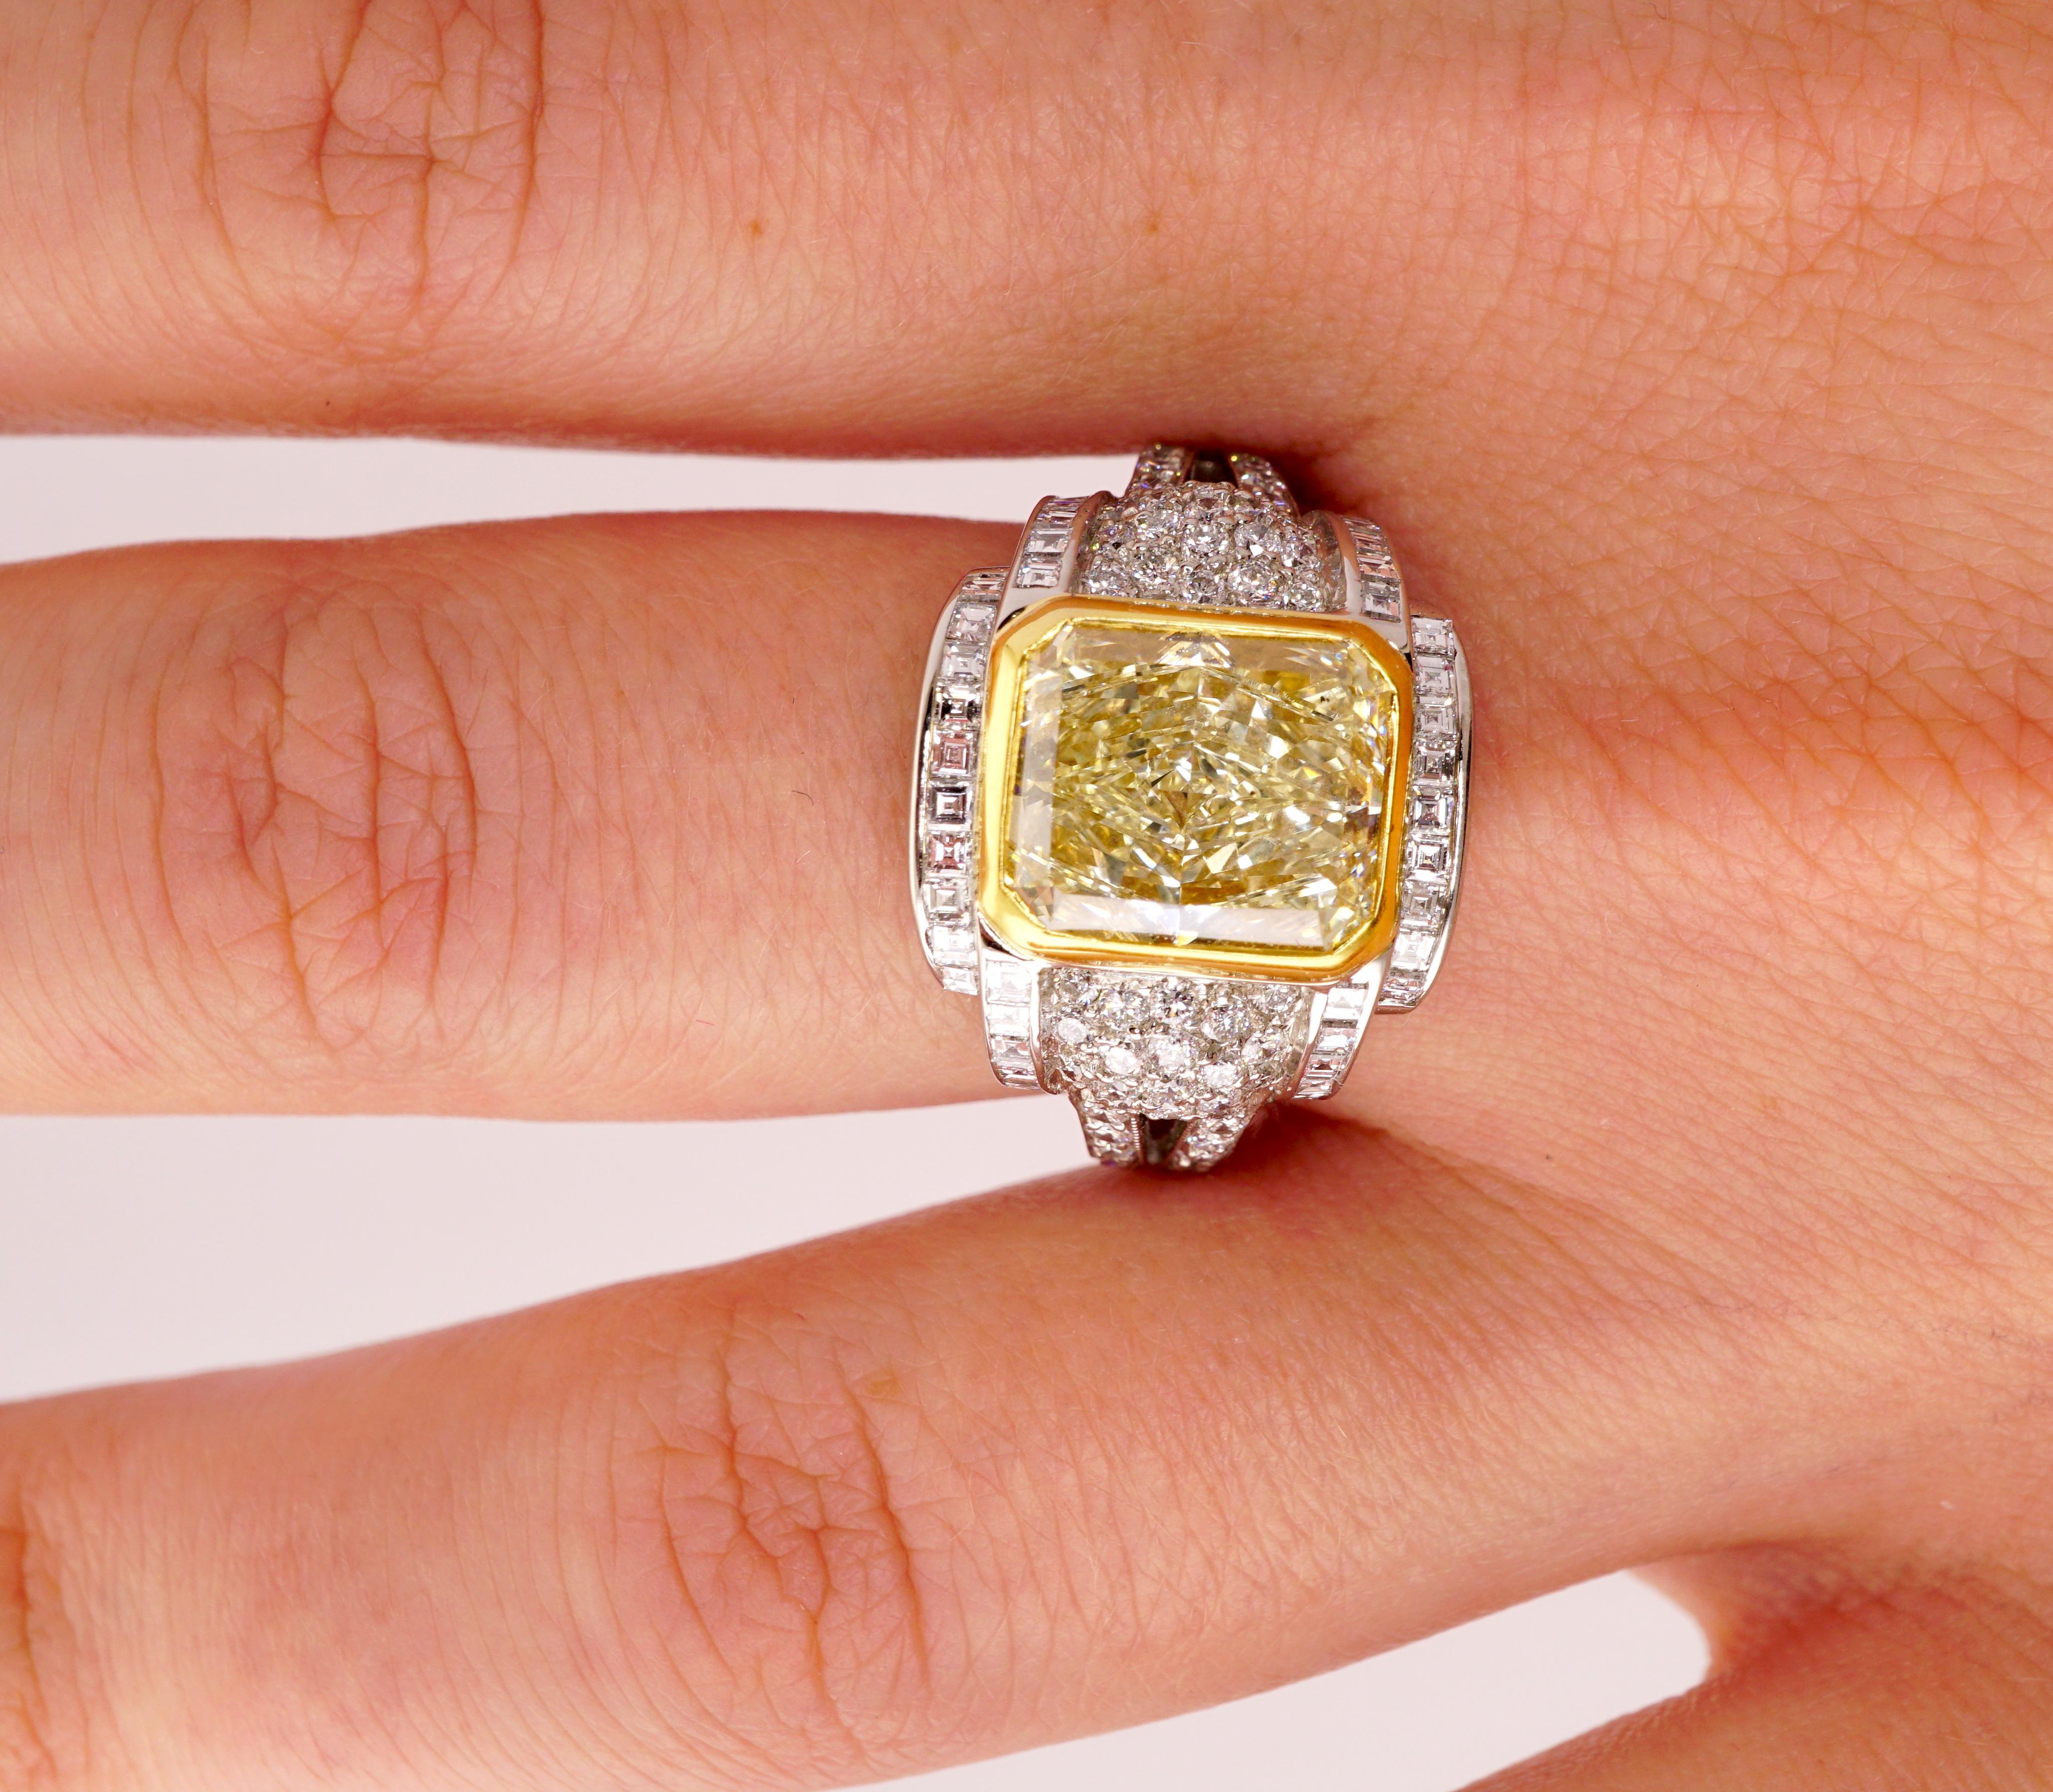 Yellow Diamond ring with EGL certificate, no.400148819D. Center stone: 3.87ct Radiant cut Fancy Yellow VS2 diamond, 9.8 x 8.3 x 4.94mm. Side stones: carre and brilliant round cut diamonds: 1.35ct F-G Vs2-SI1. Total carat weight: 5.22ct. Metal: